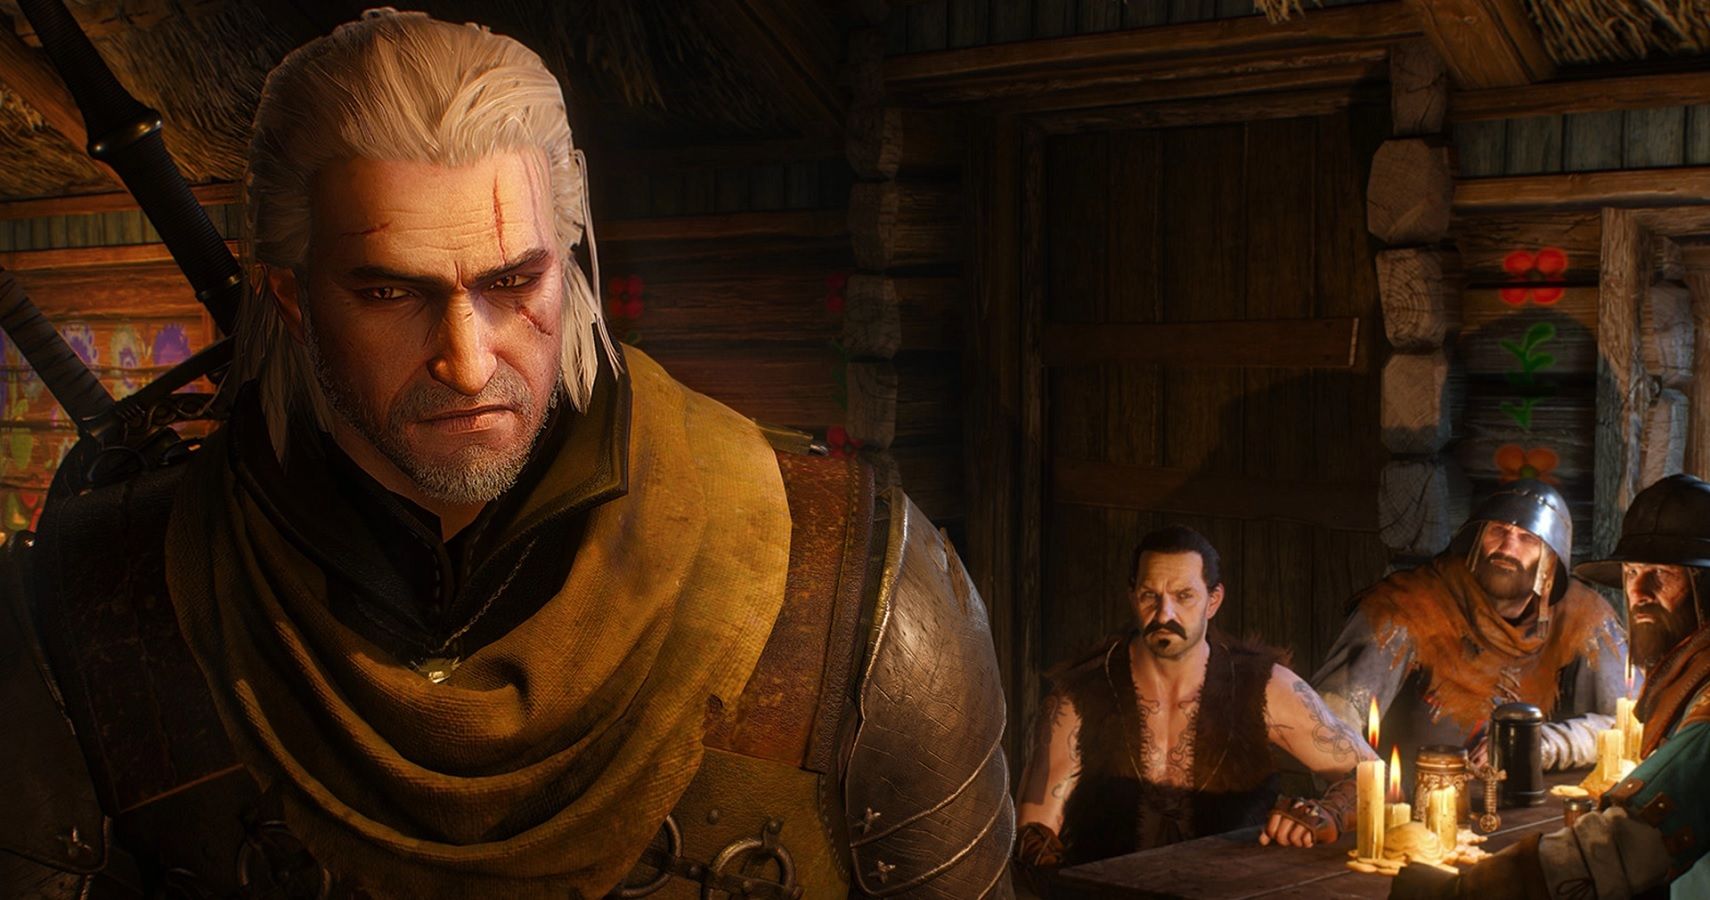 Easter Eggs: The Witcher 2: Assassins of Kings